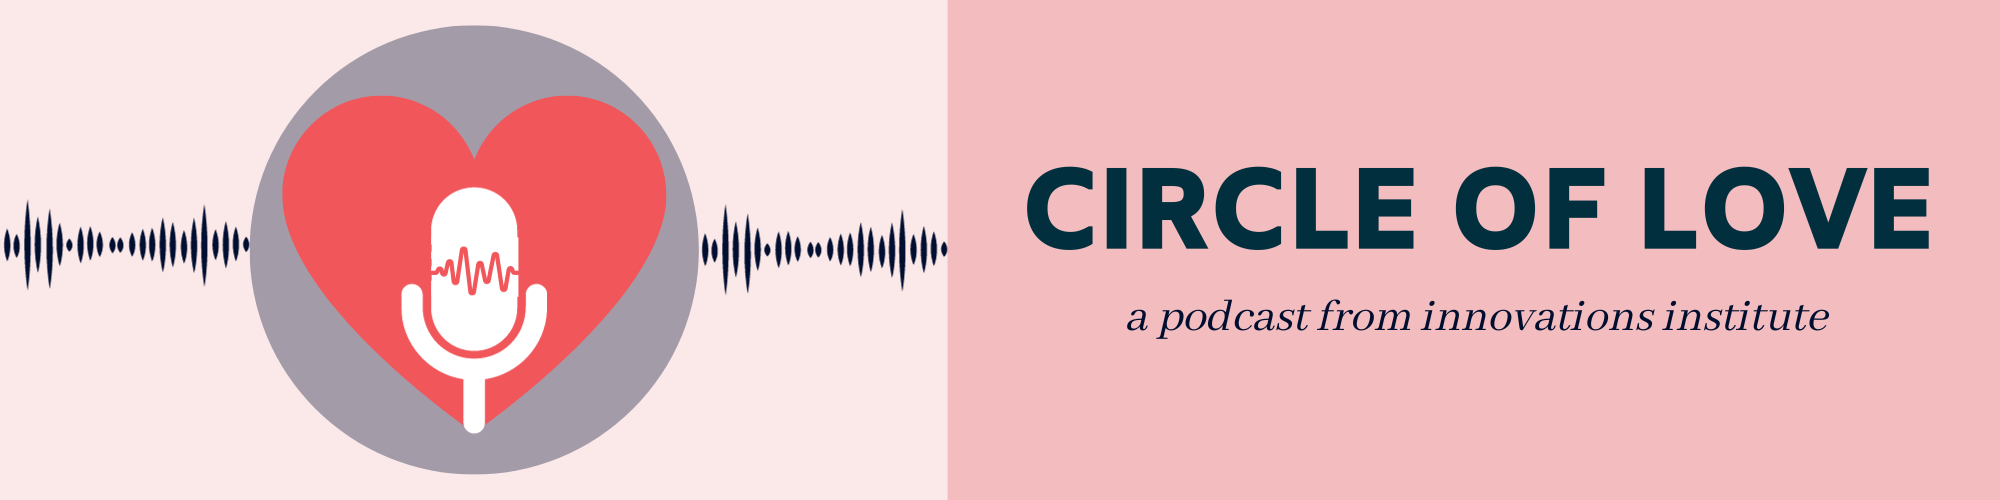 graphic with name of podcast, Circle of Love, and graphic of microphone in a heart